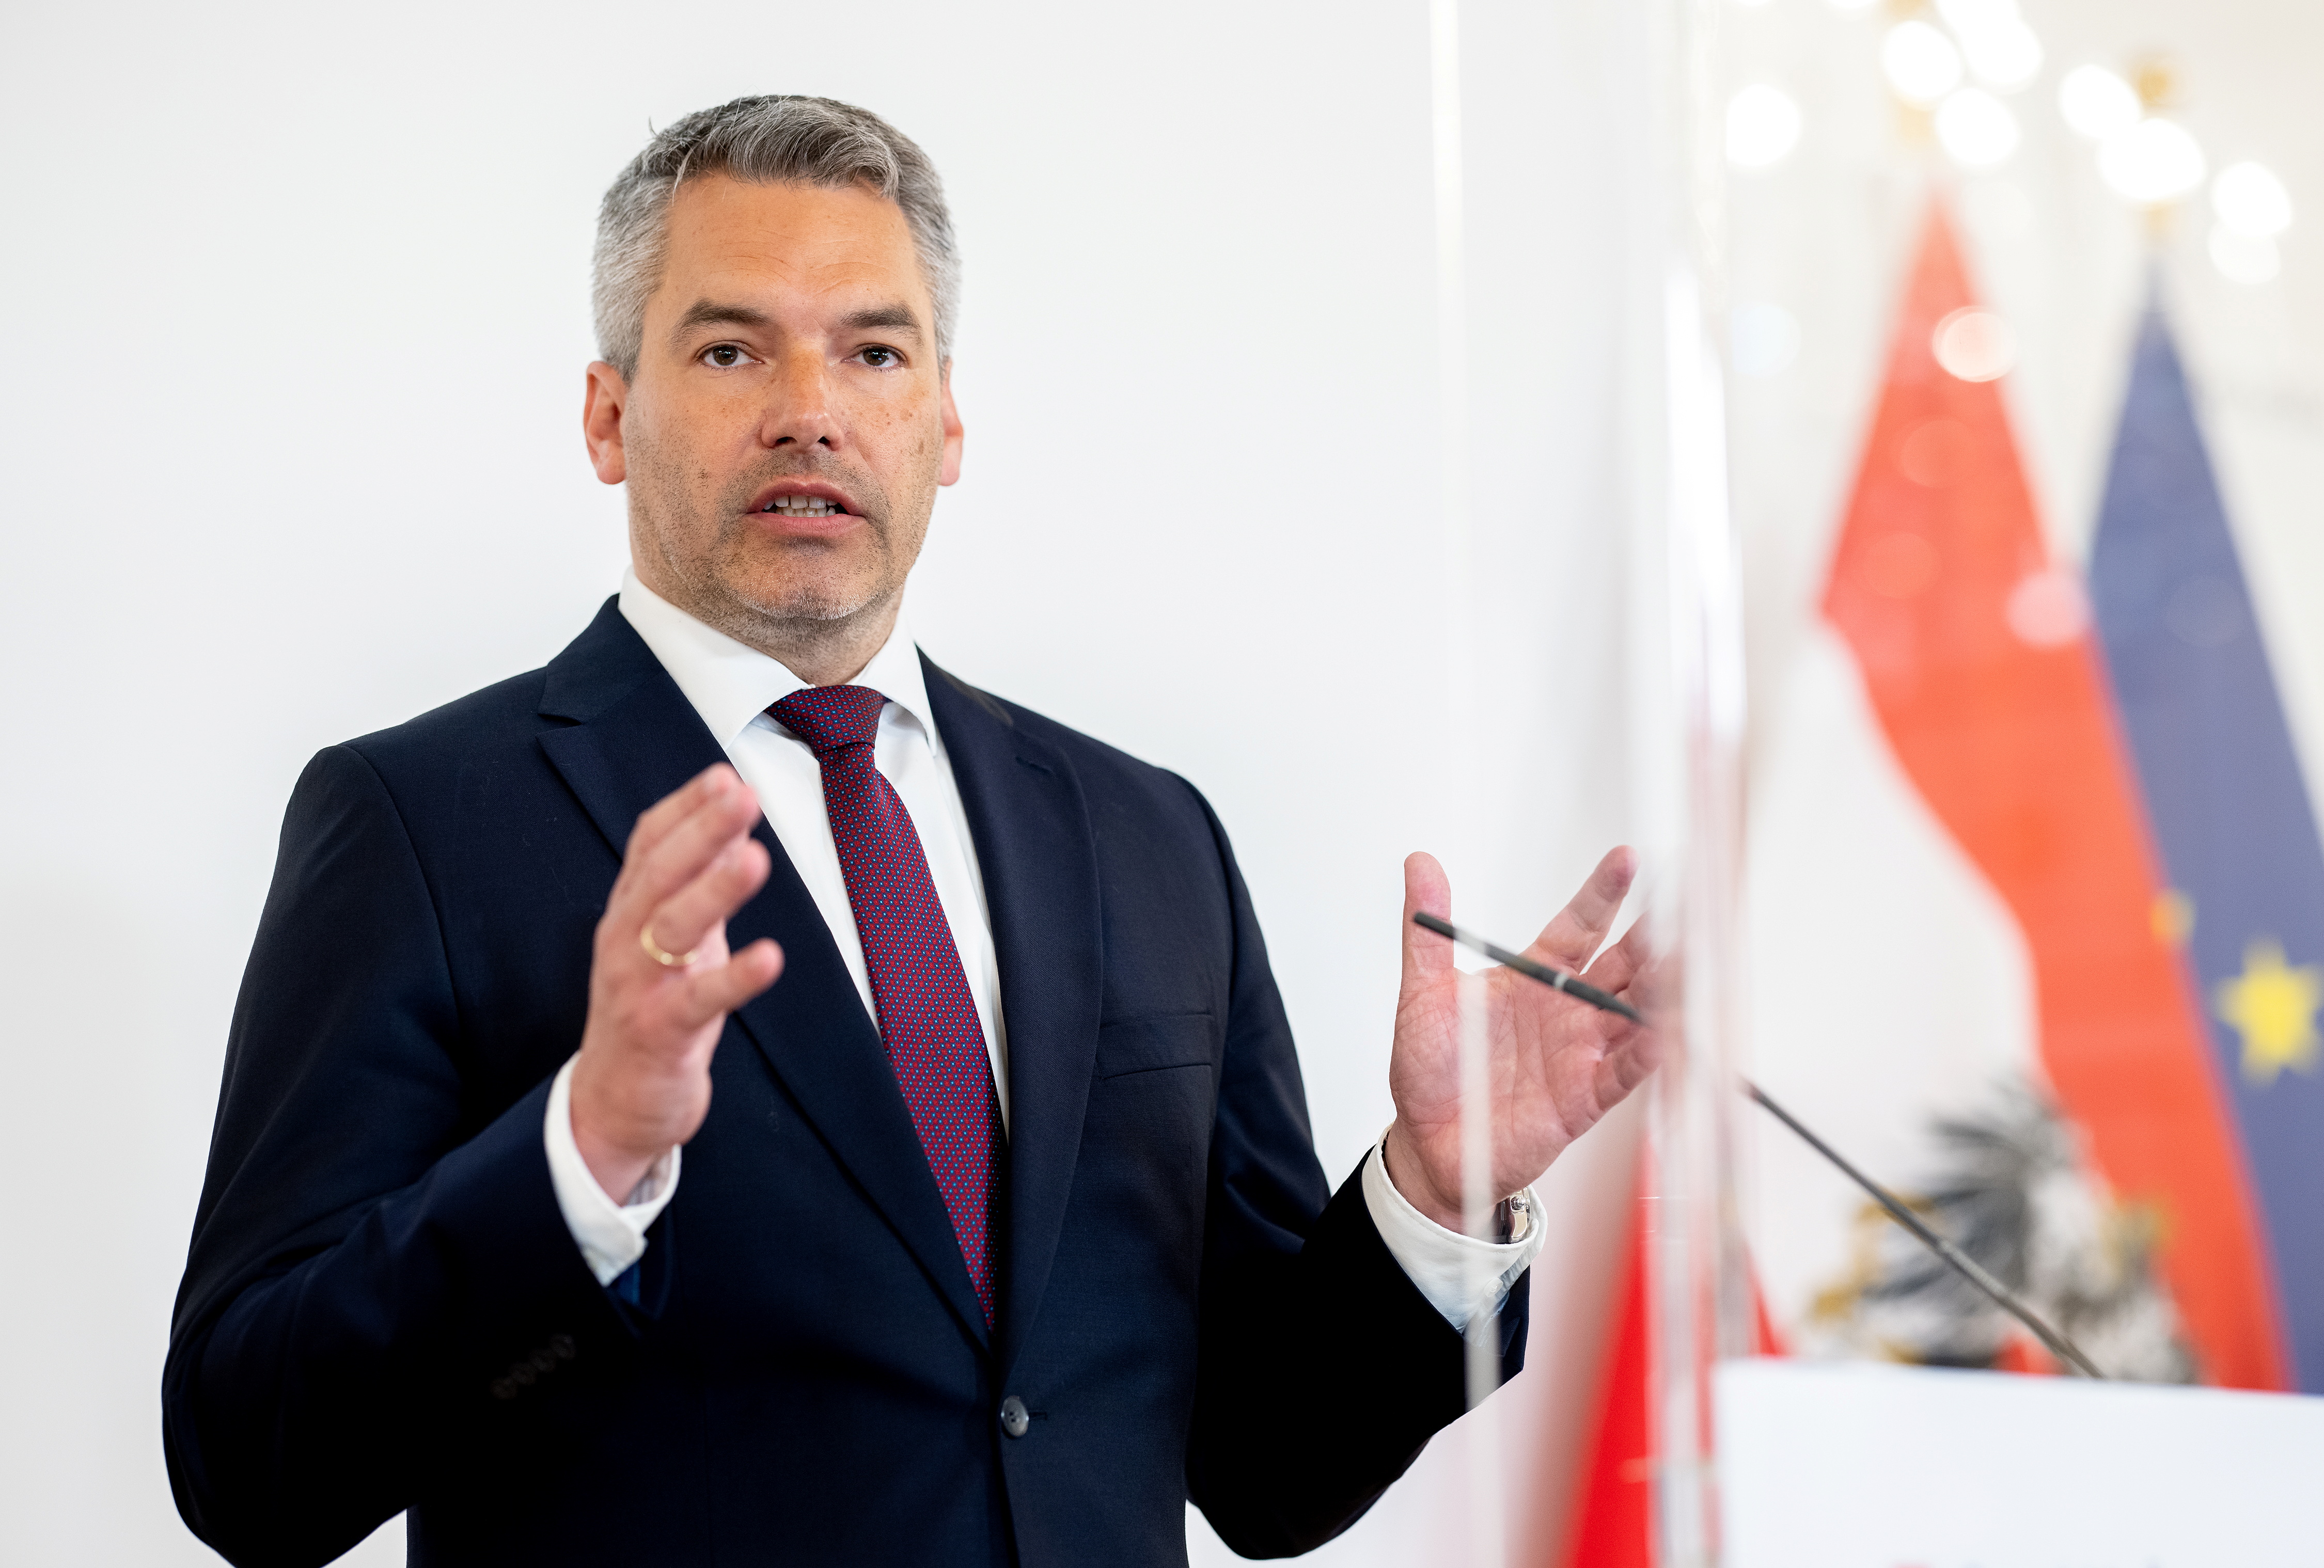 Austrian Interior Minister Karl Nehammer speaks at a news conference on Austria's role in a global sting against organised crime dubbed 'Operation Trojan Shield' in Vienna, Austria June 9, 2021. REUTERS/Lisi Niesner